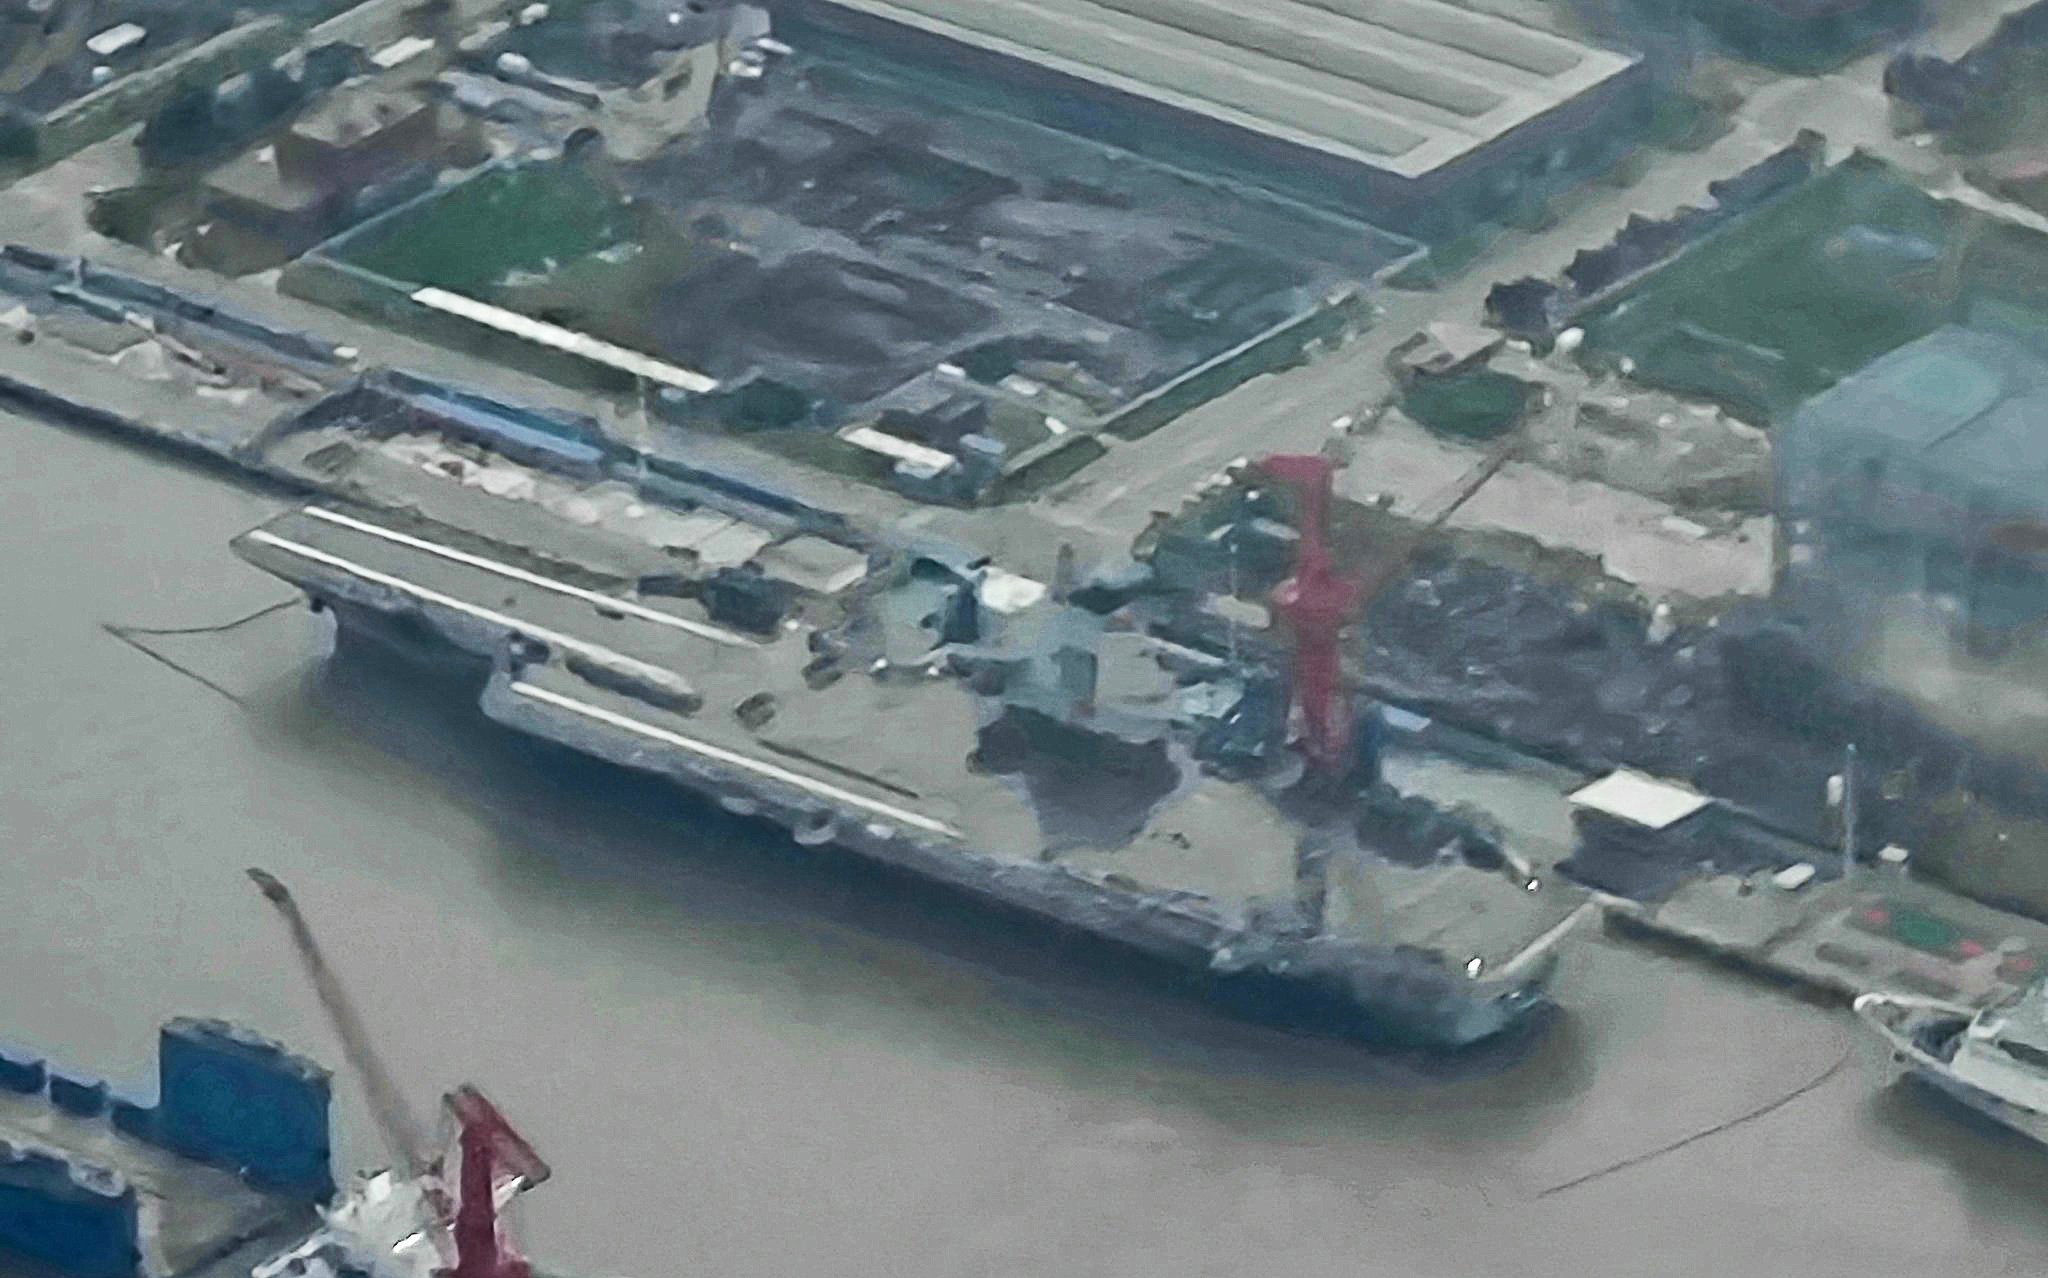 All covers appear to have been removed from  the three advanced electromagnetic catapults on the Fujian flight deck. Photo: Weibo